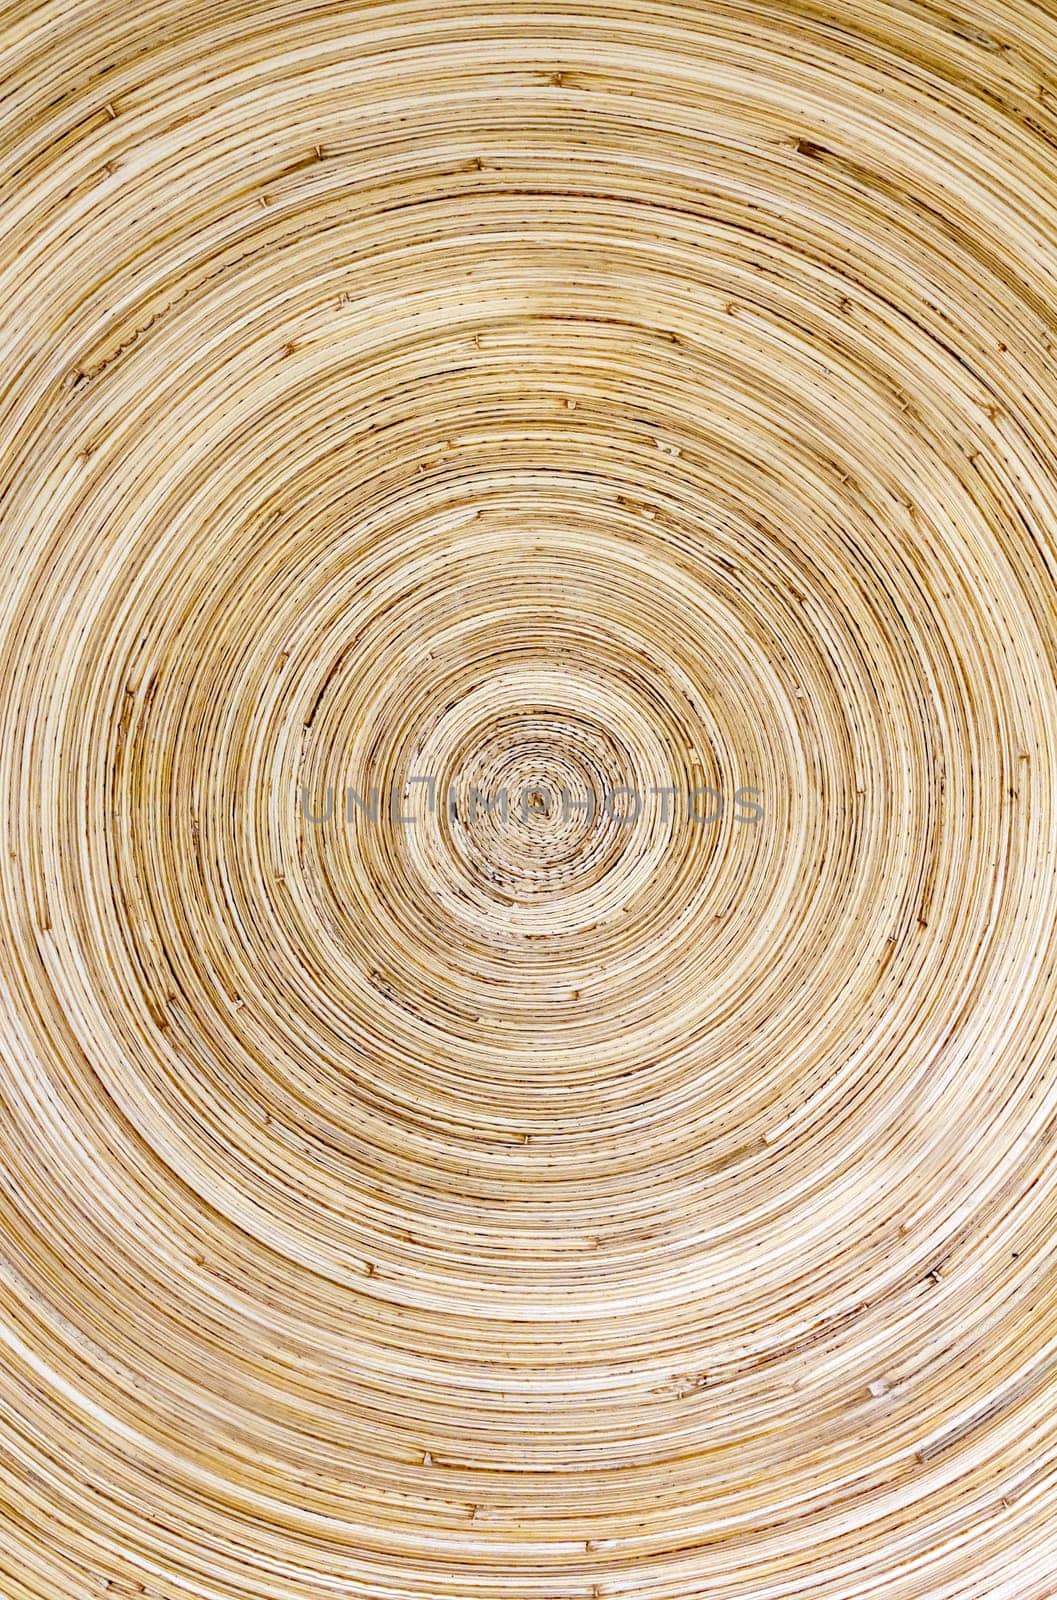 Concentric patterns of wood by germanopoli